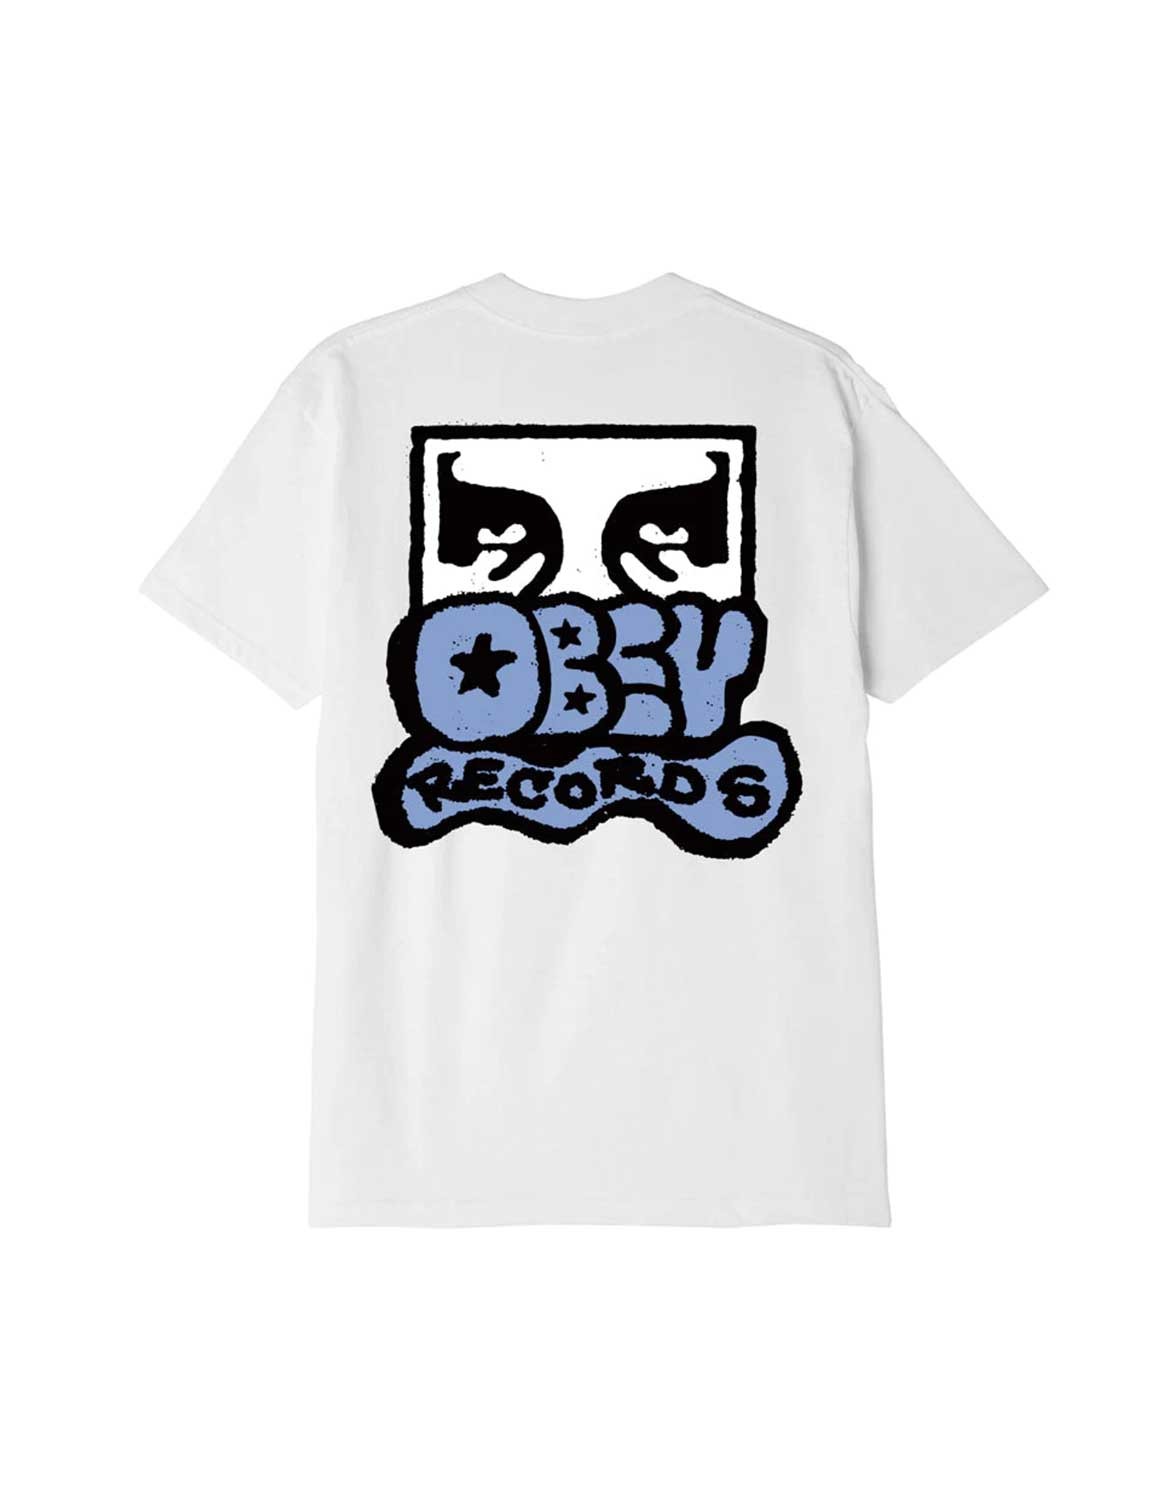 Obey Records